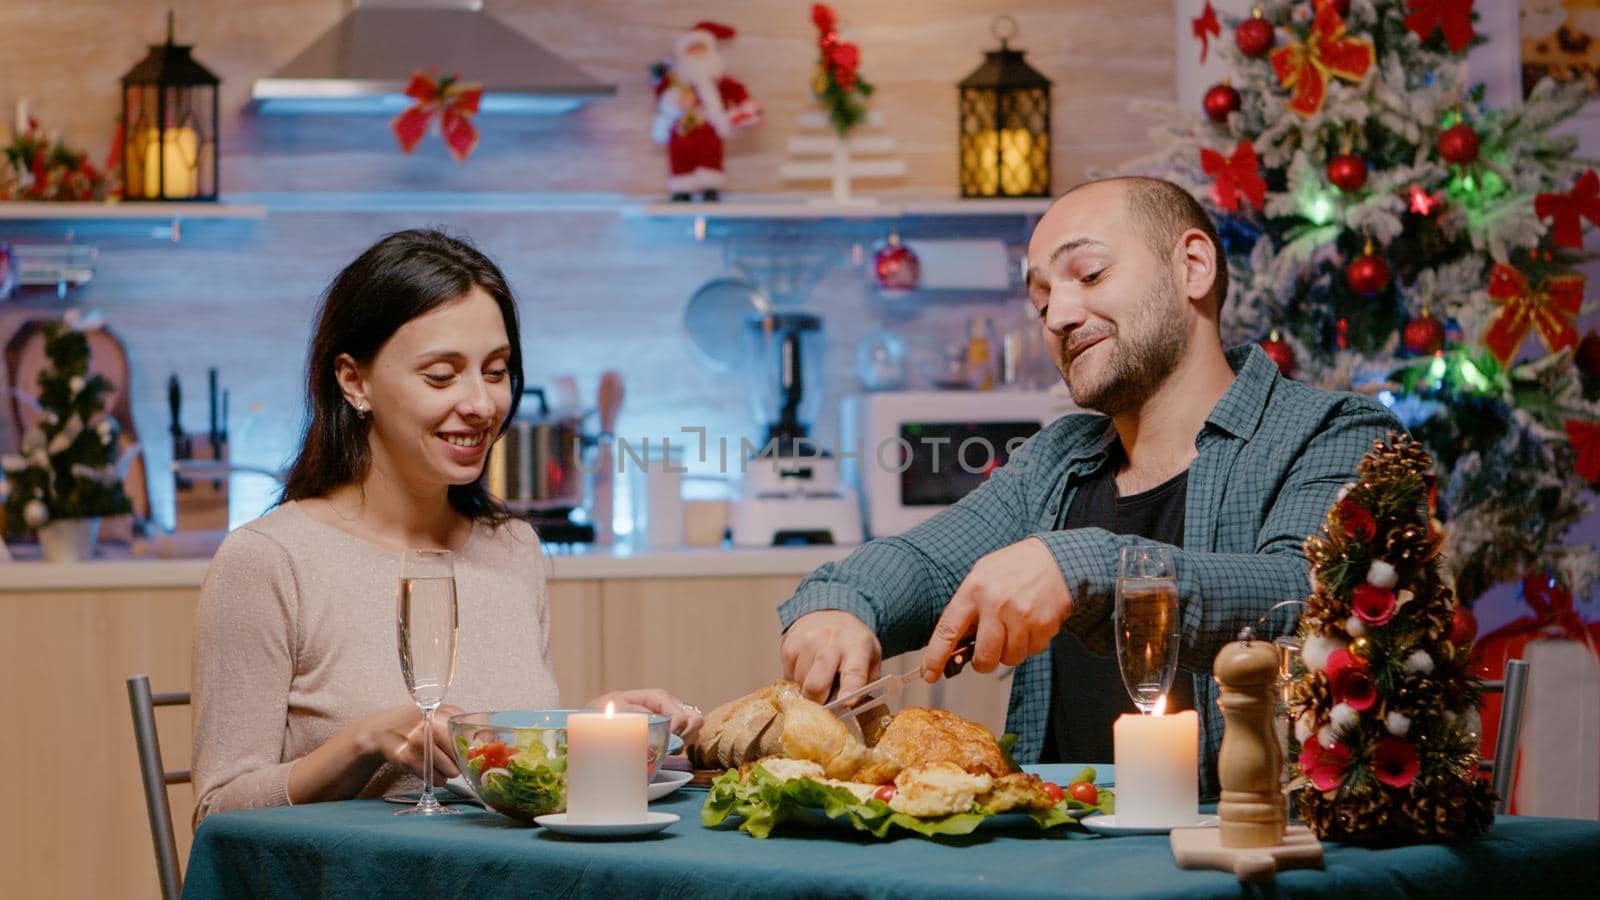 Cheerful couple celebrating christmas eve with festive dinner in decorated kitchen. Man and woman eating seasonal meal and drinking champagne while having candles on table for celebration.